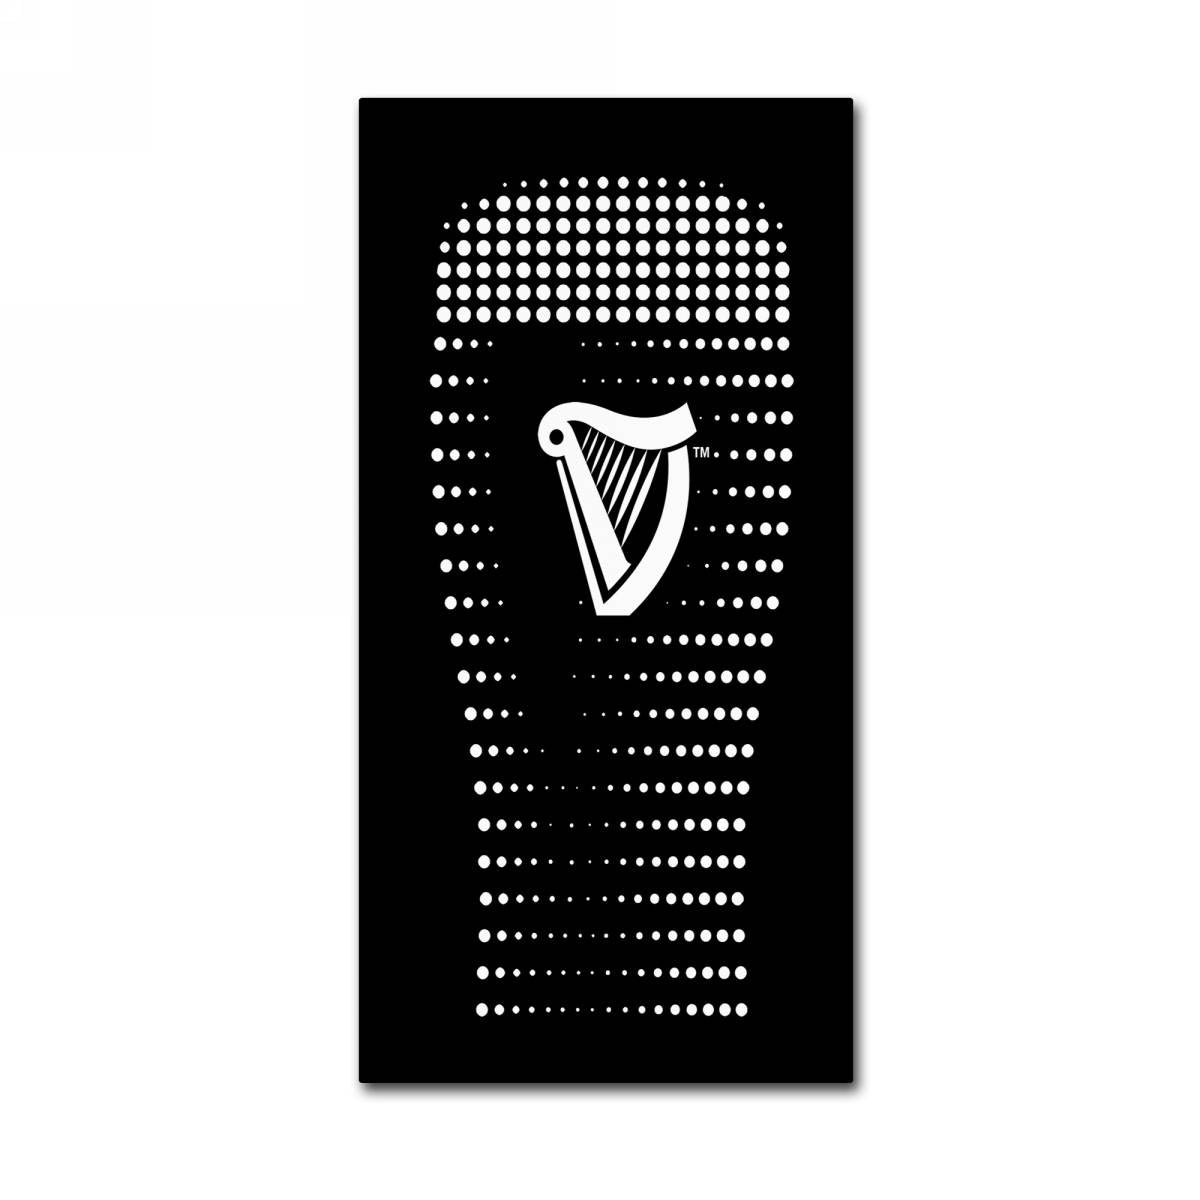 A black and white Guinness mug with a harp on it, perfect for enjoying a brew.